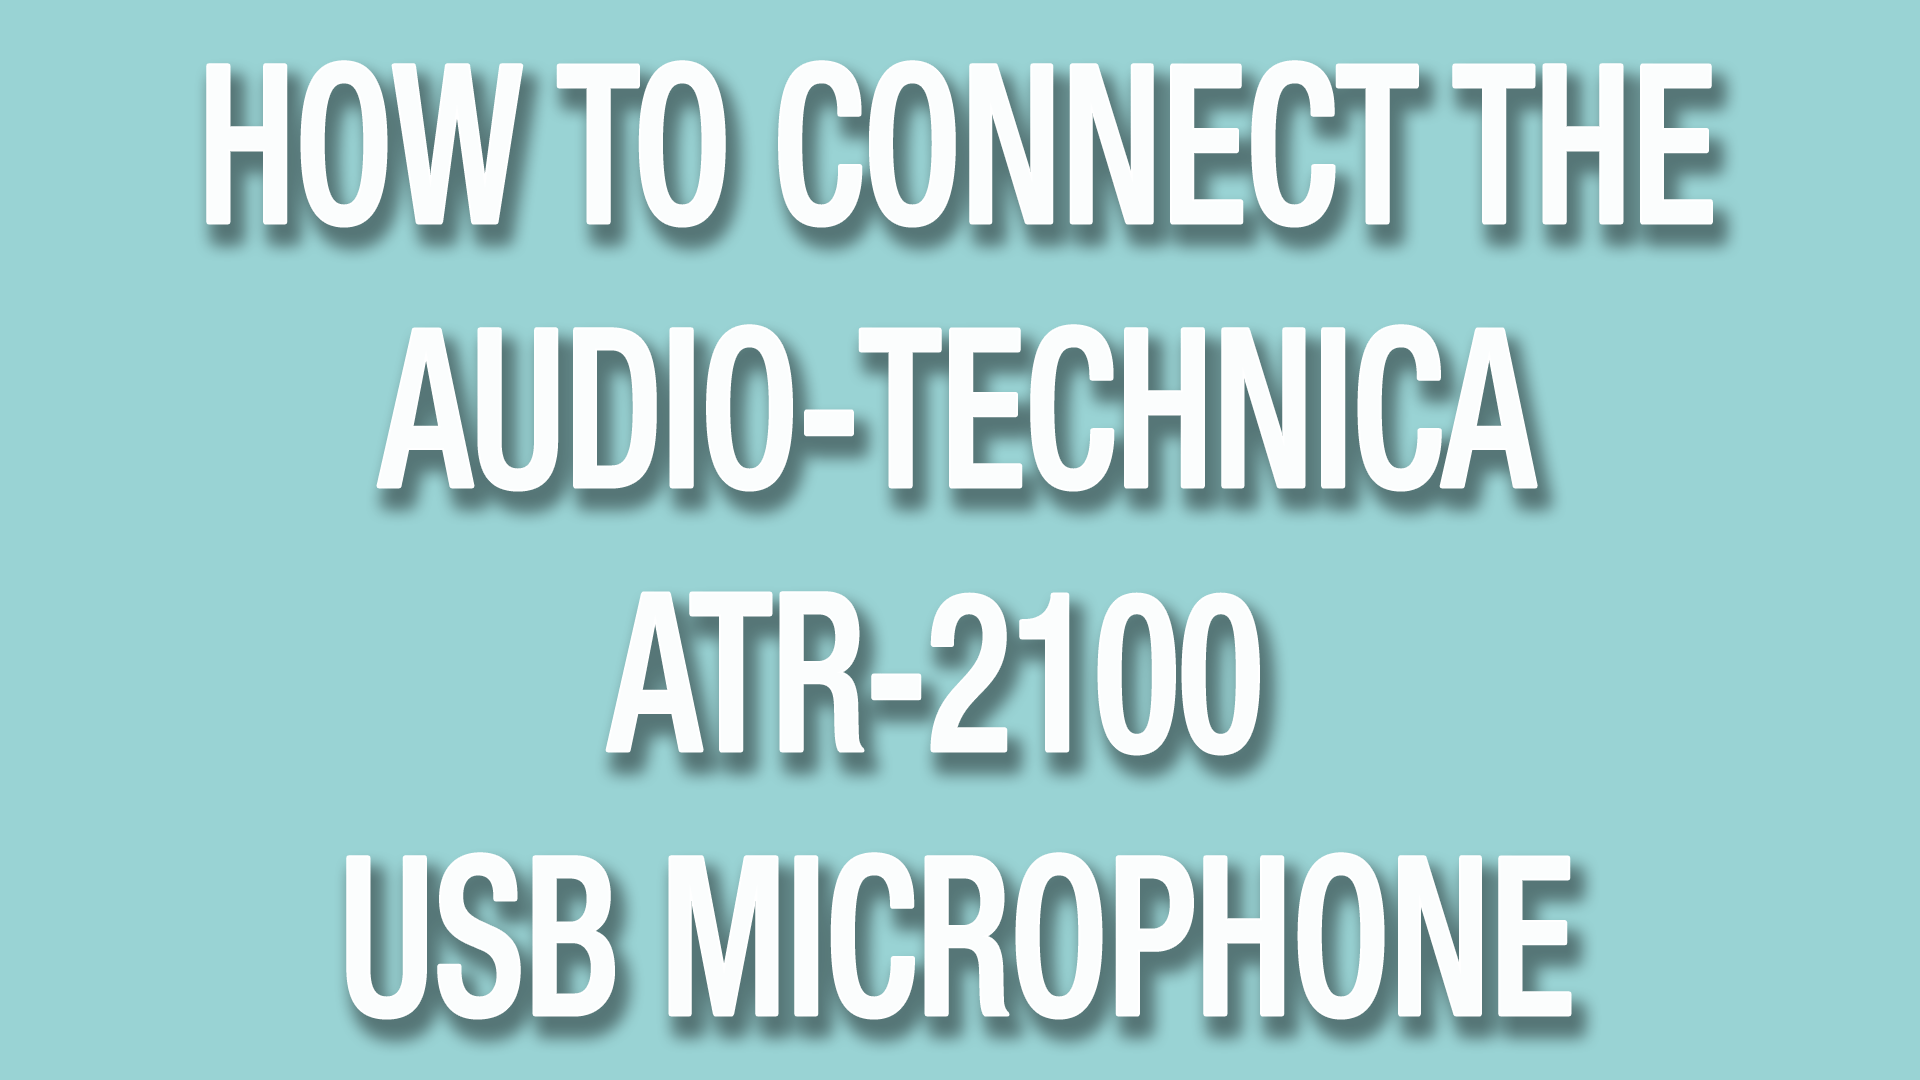 How to connect the Audio-Technica ATR-2100 USB microphone